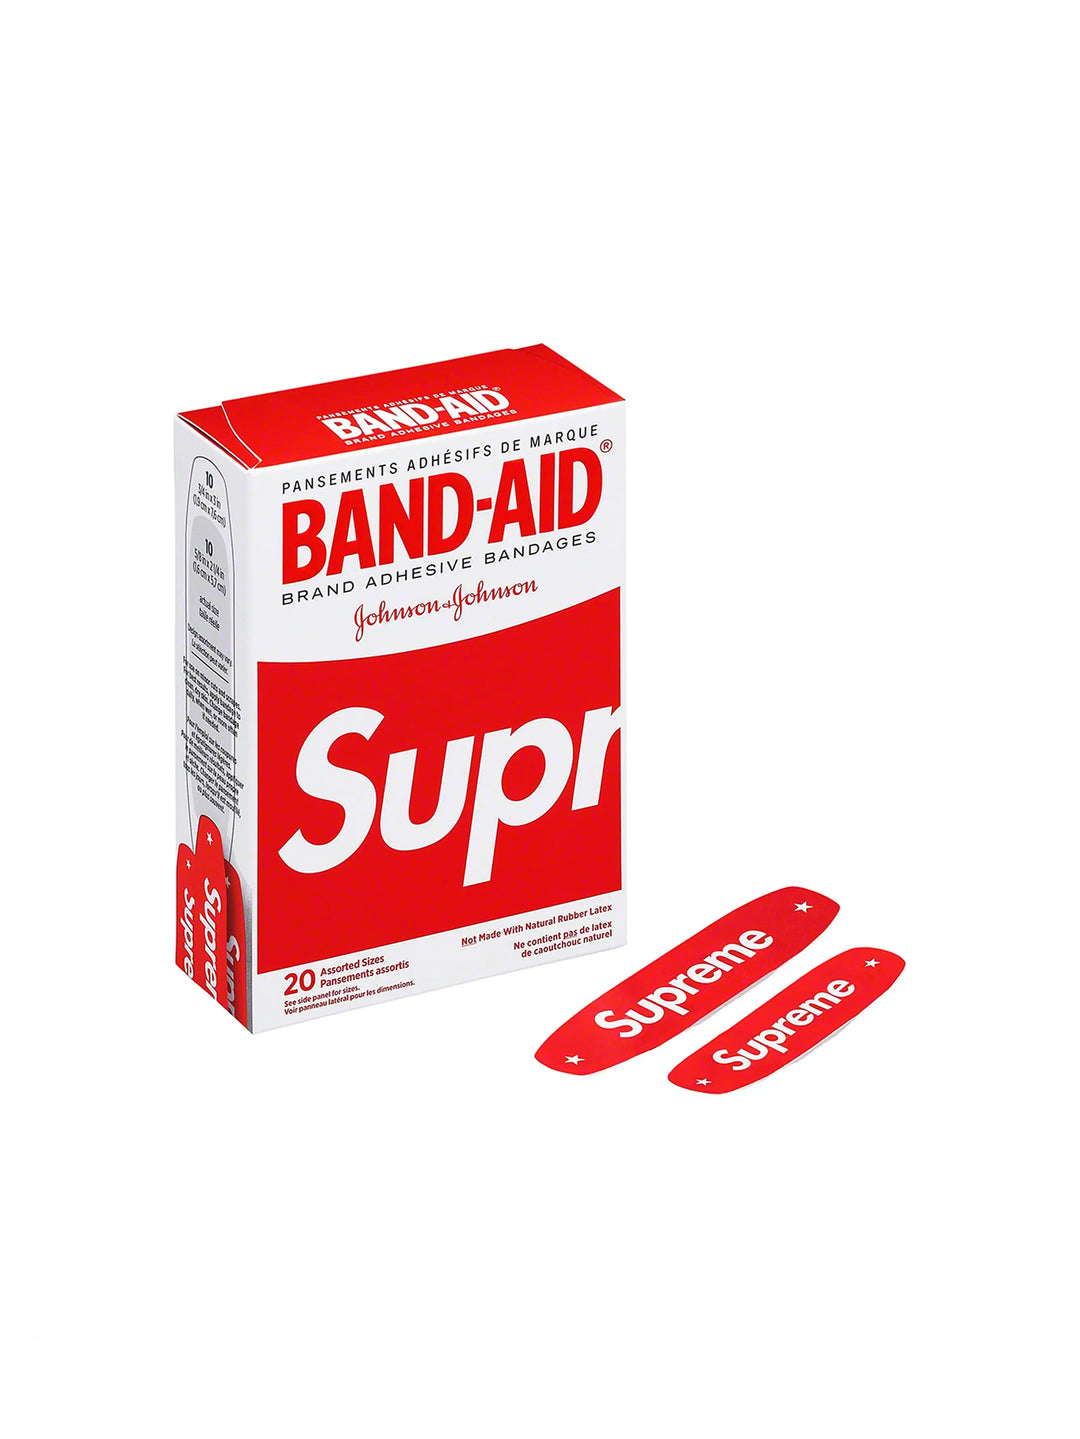 Supreme x Band Aid Adhesive Bandages (Box of 20) Red in Melbourne, Australia - Prior